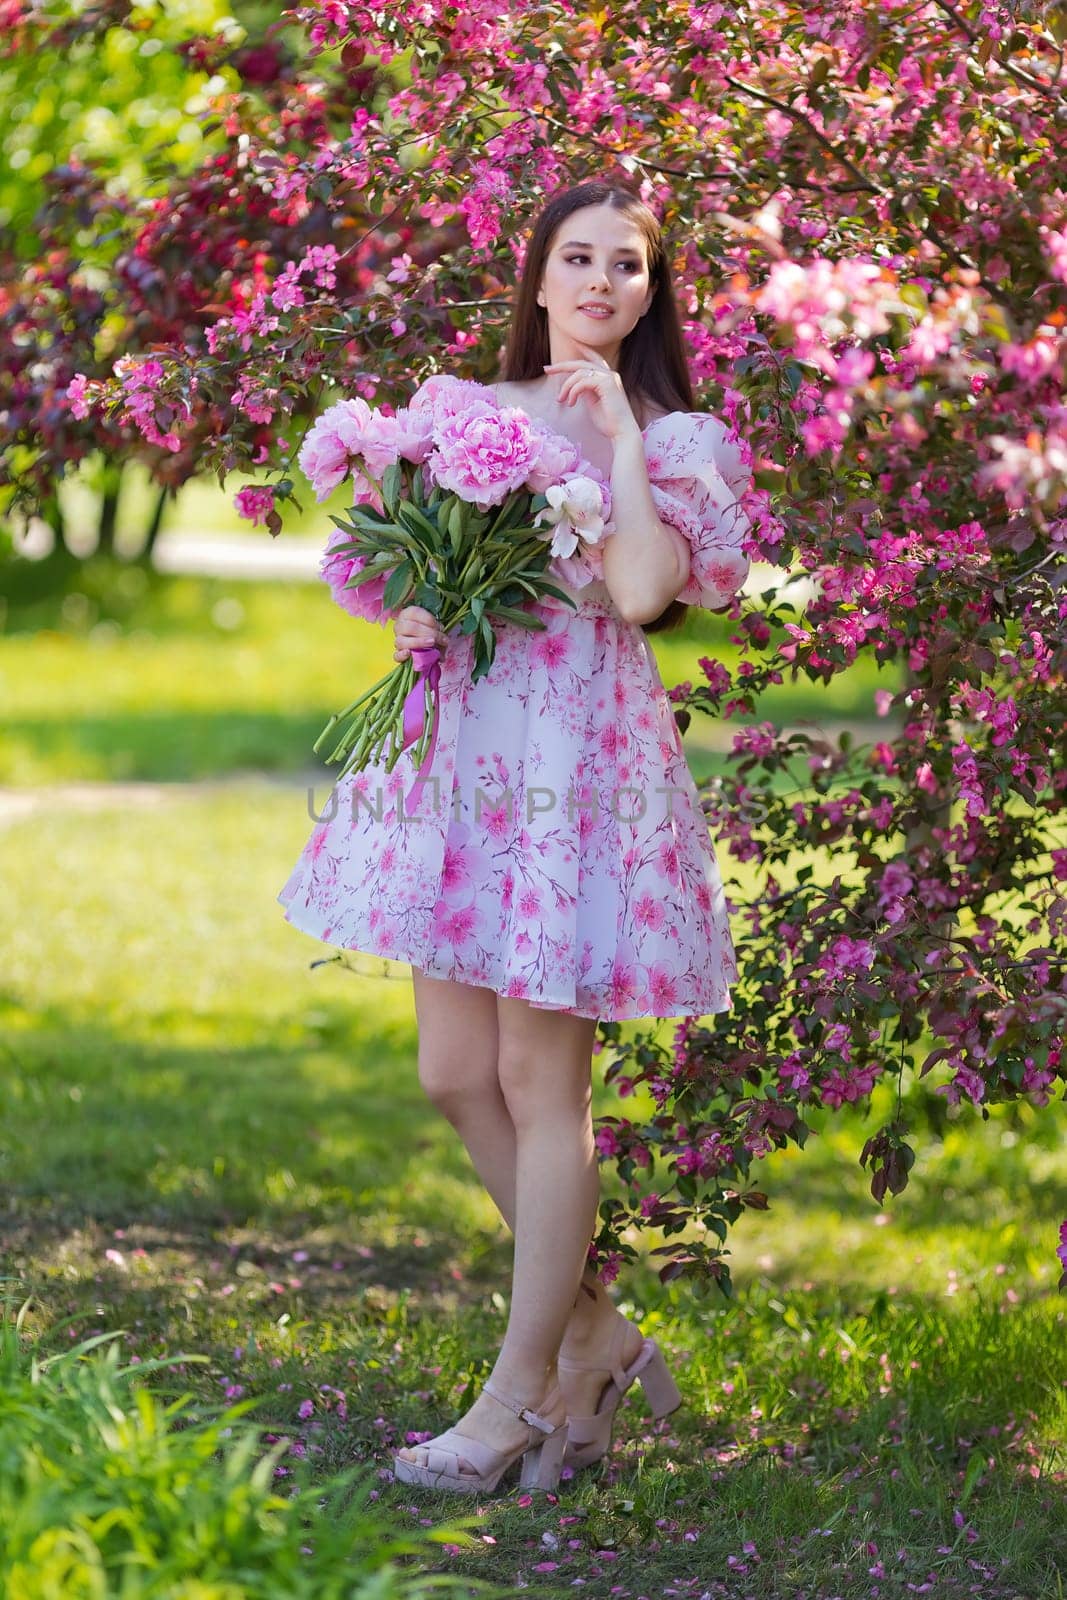 Adorable girl, stands with a large bouquet of peonies, near pink flowering trees in the garden. Copy space. Vertical